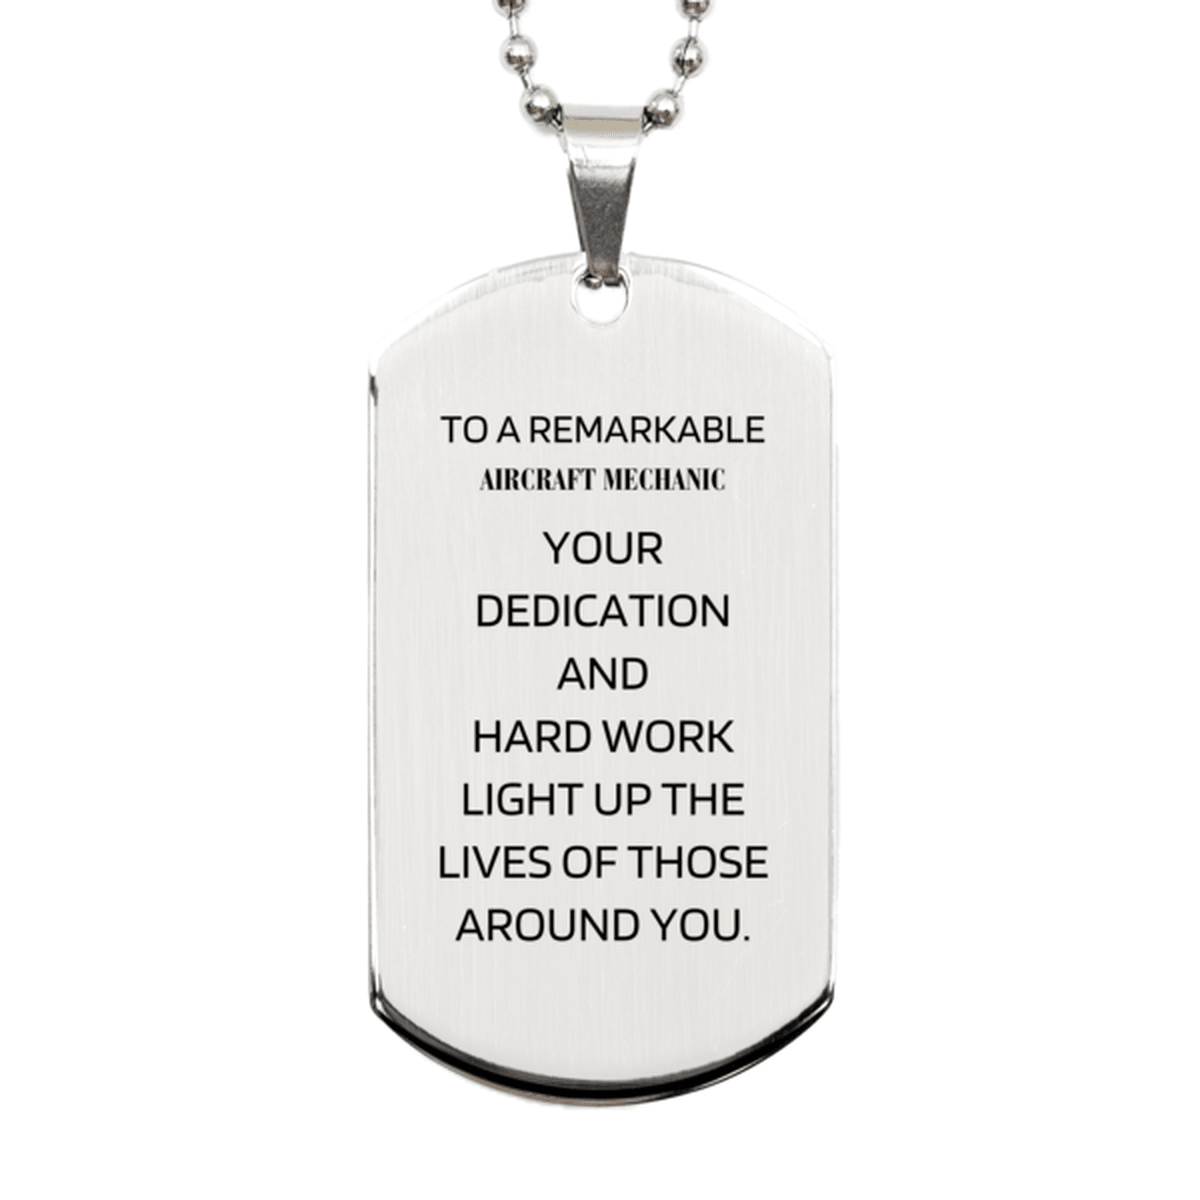 Remarkable Aircraft Mechanic Gifts, Your dedication and hard work, Inspirational Birthday Christmas Unique Silver Dog Tag For Aircraft Mechanic, Coworkers, Men, Women, Friends - Mallard Moon Gift Shop